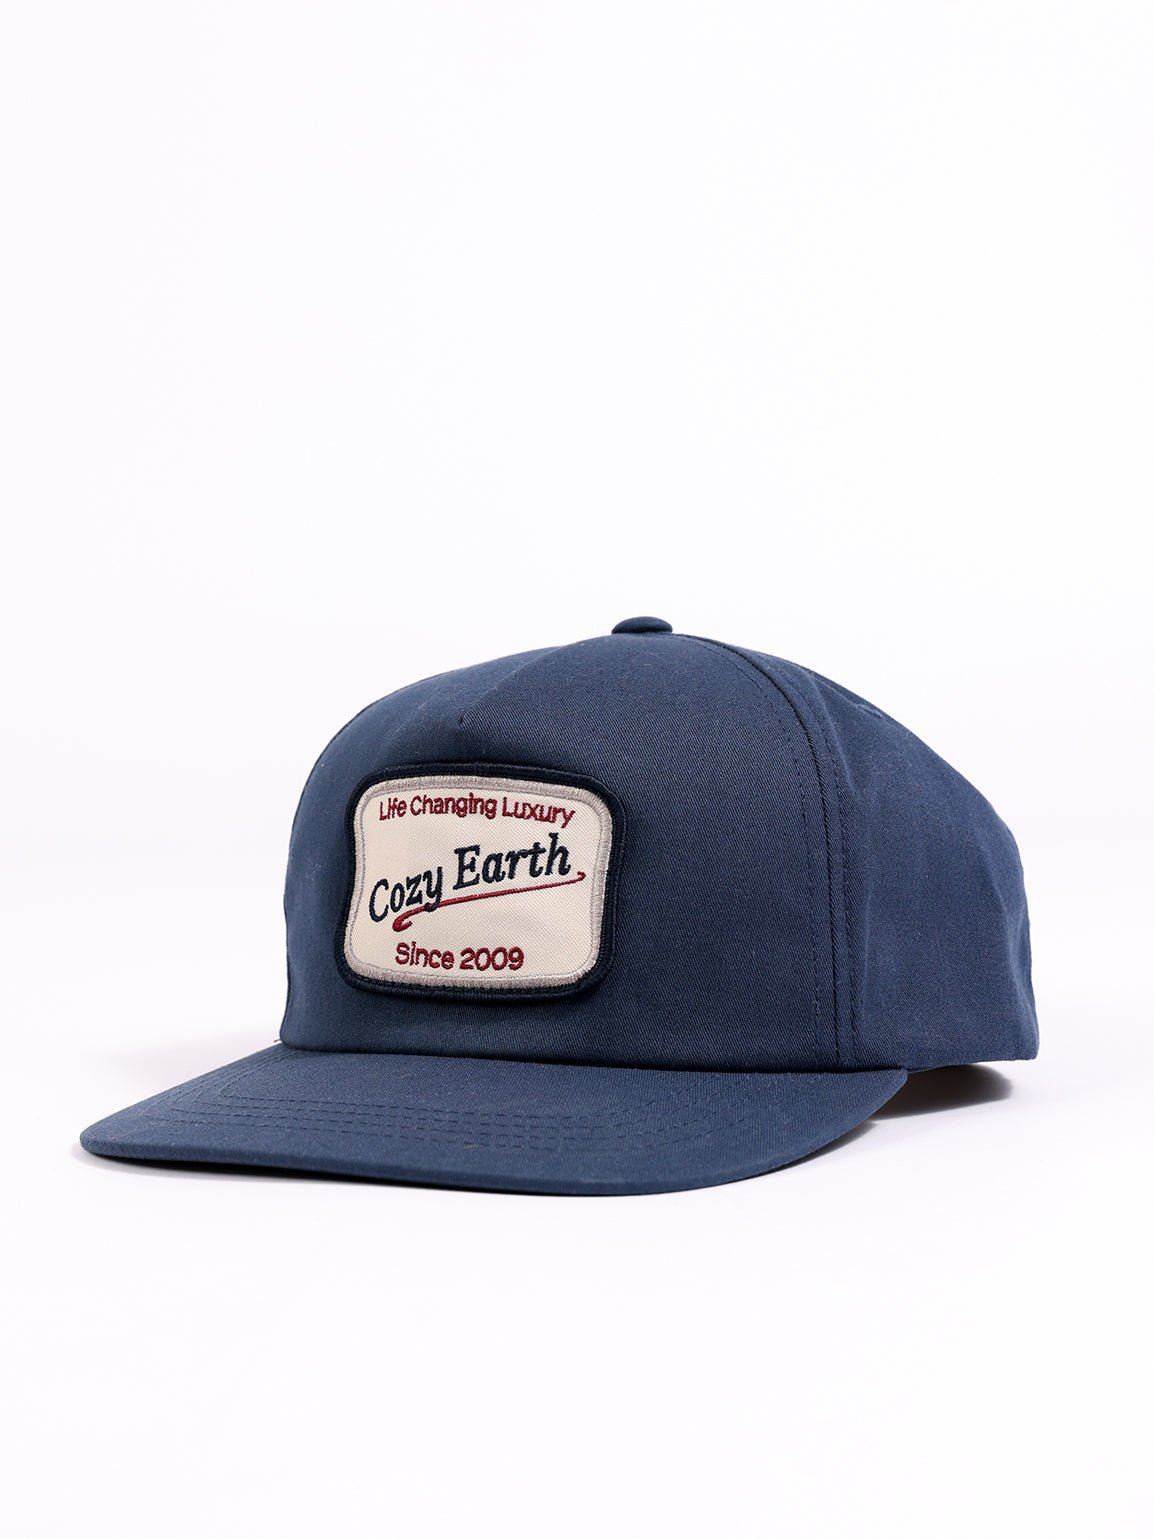 Front and side of navy heritage snapback with white background 